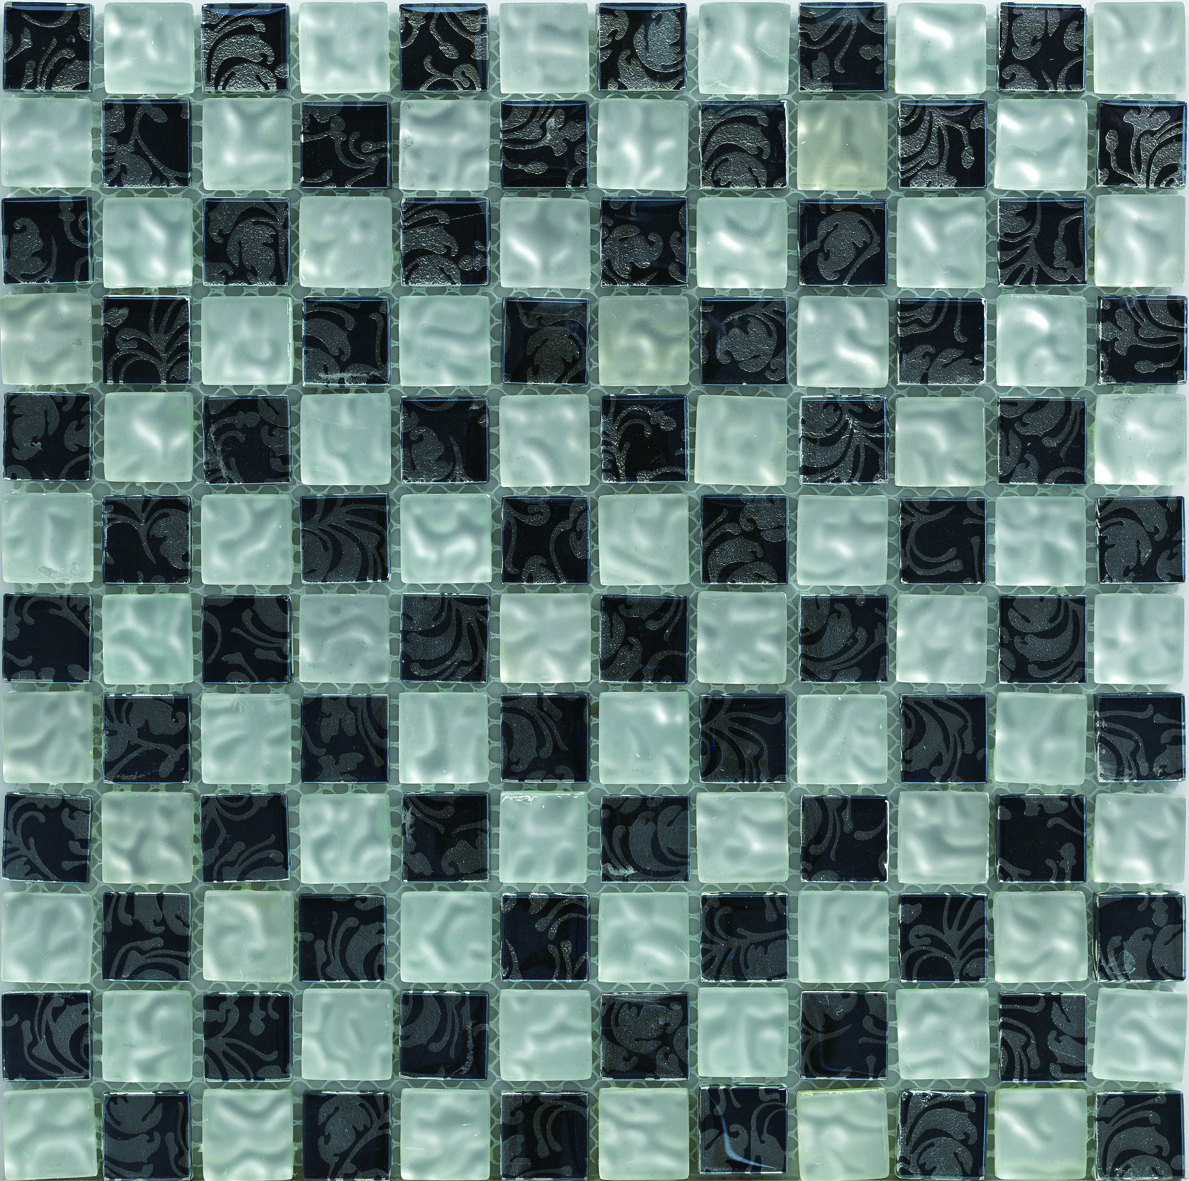 Crystal mosaic black and white